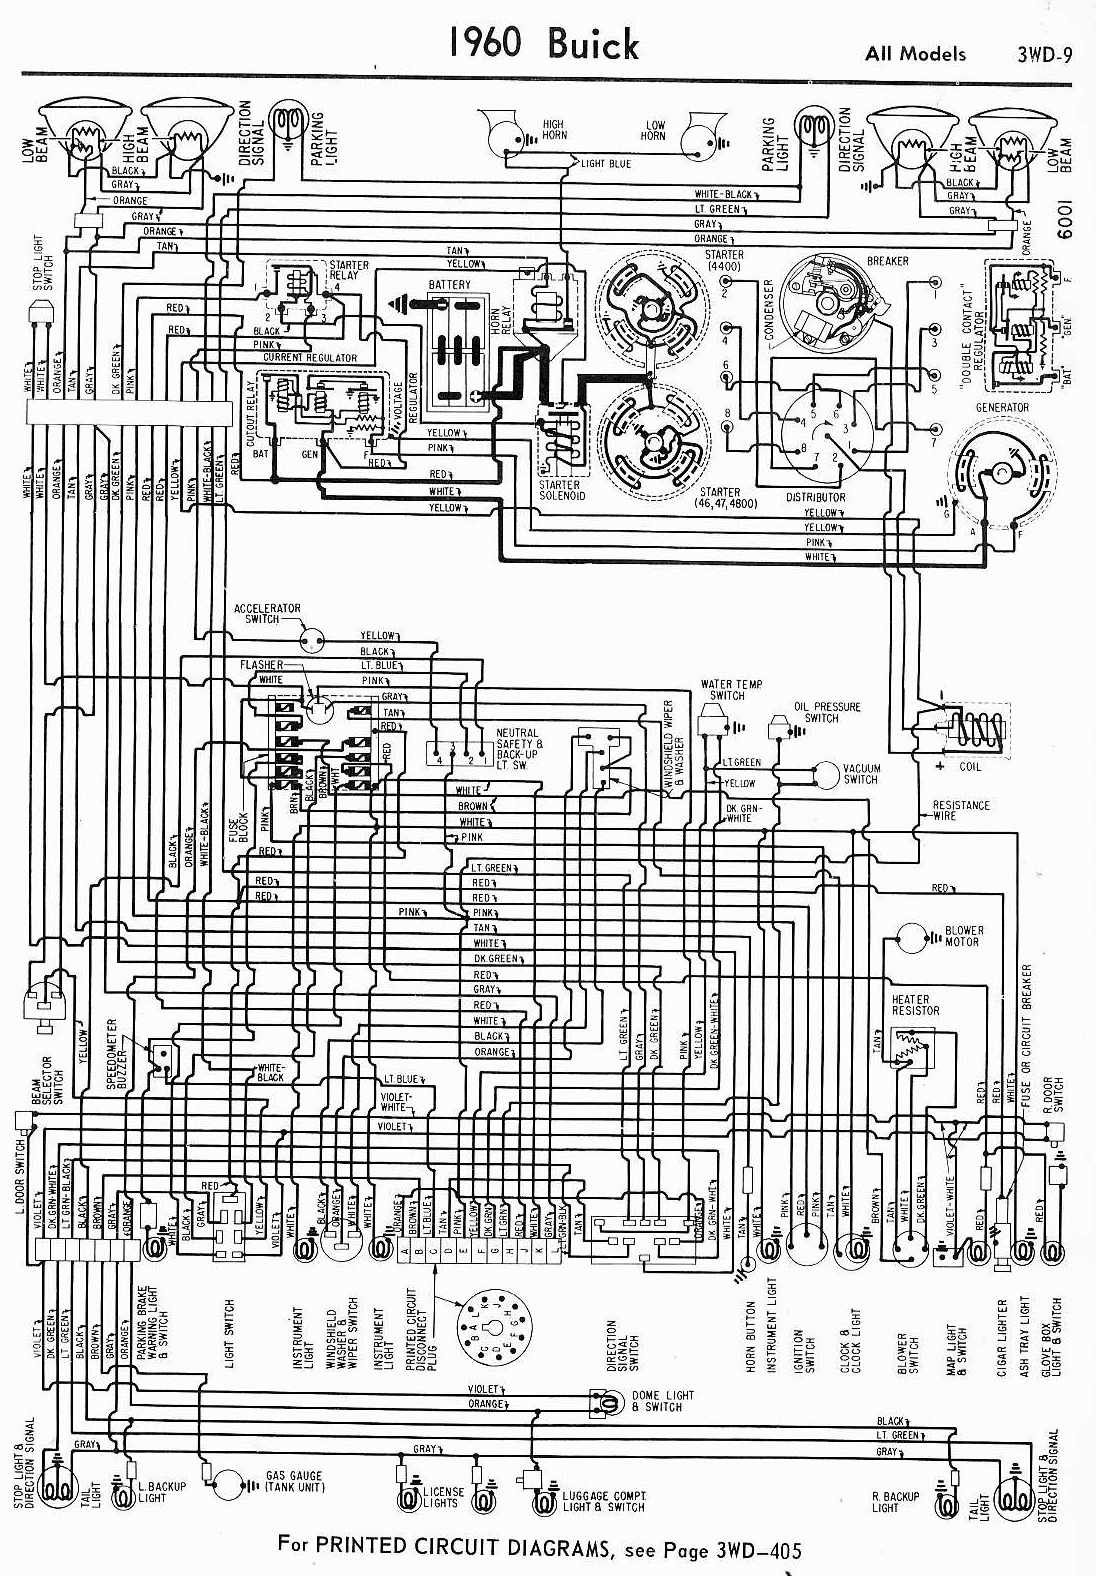 Buick Regal Wiring Diagram from www.automotive-manuals.net